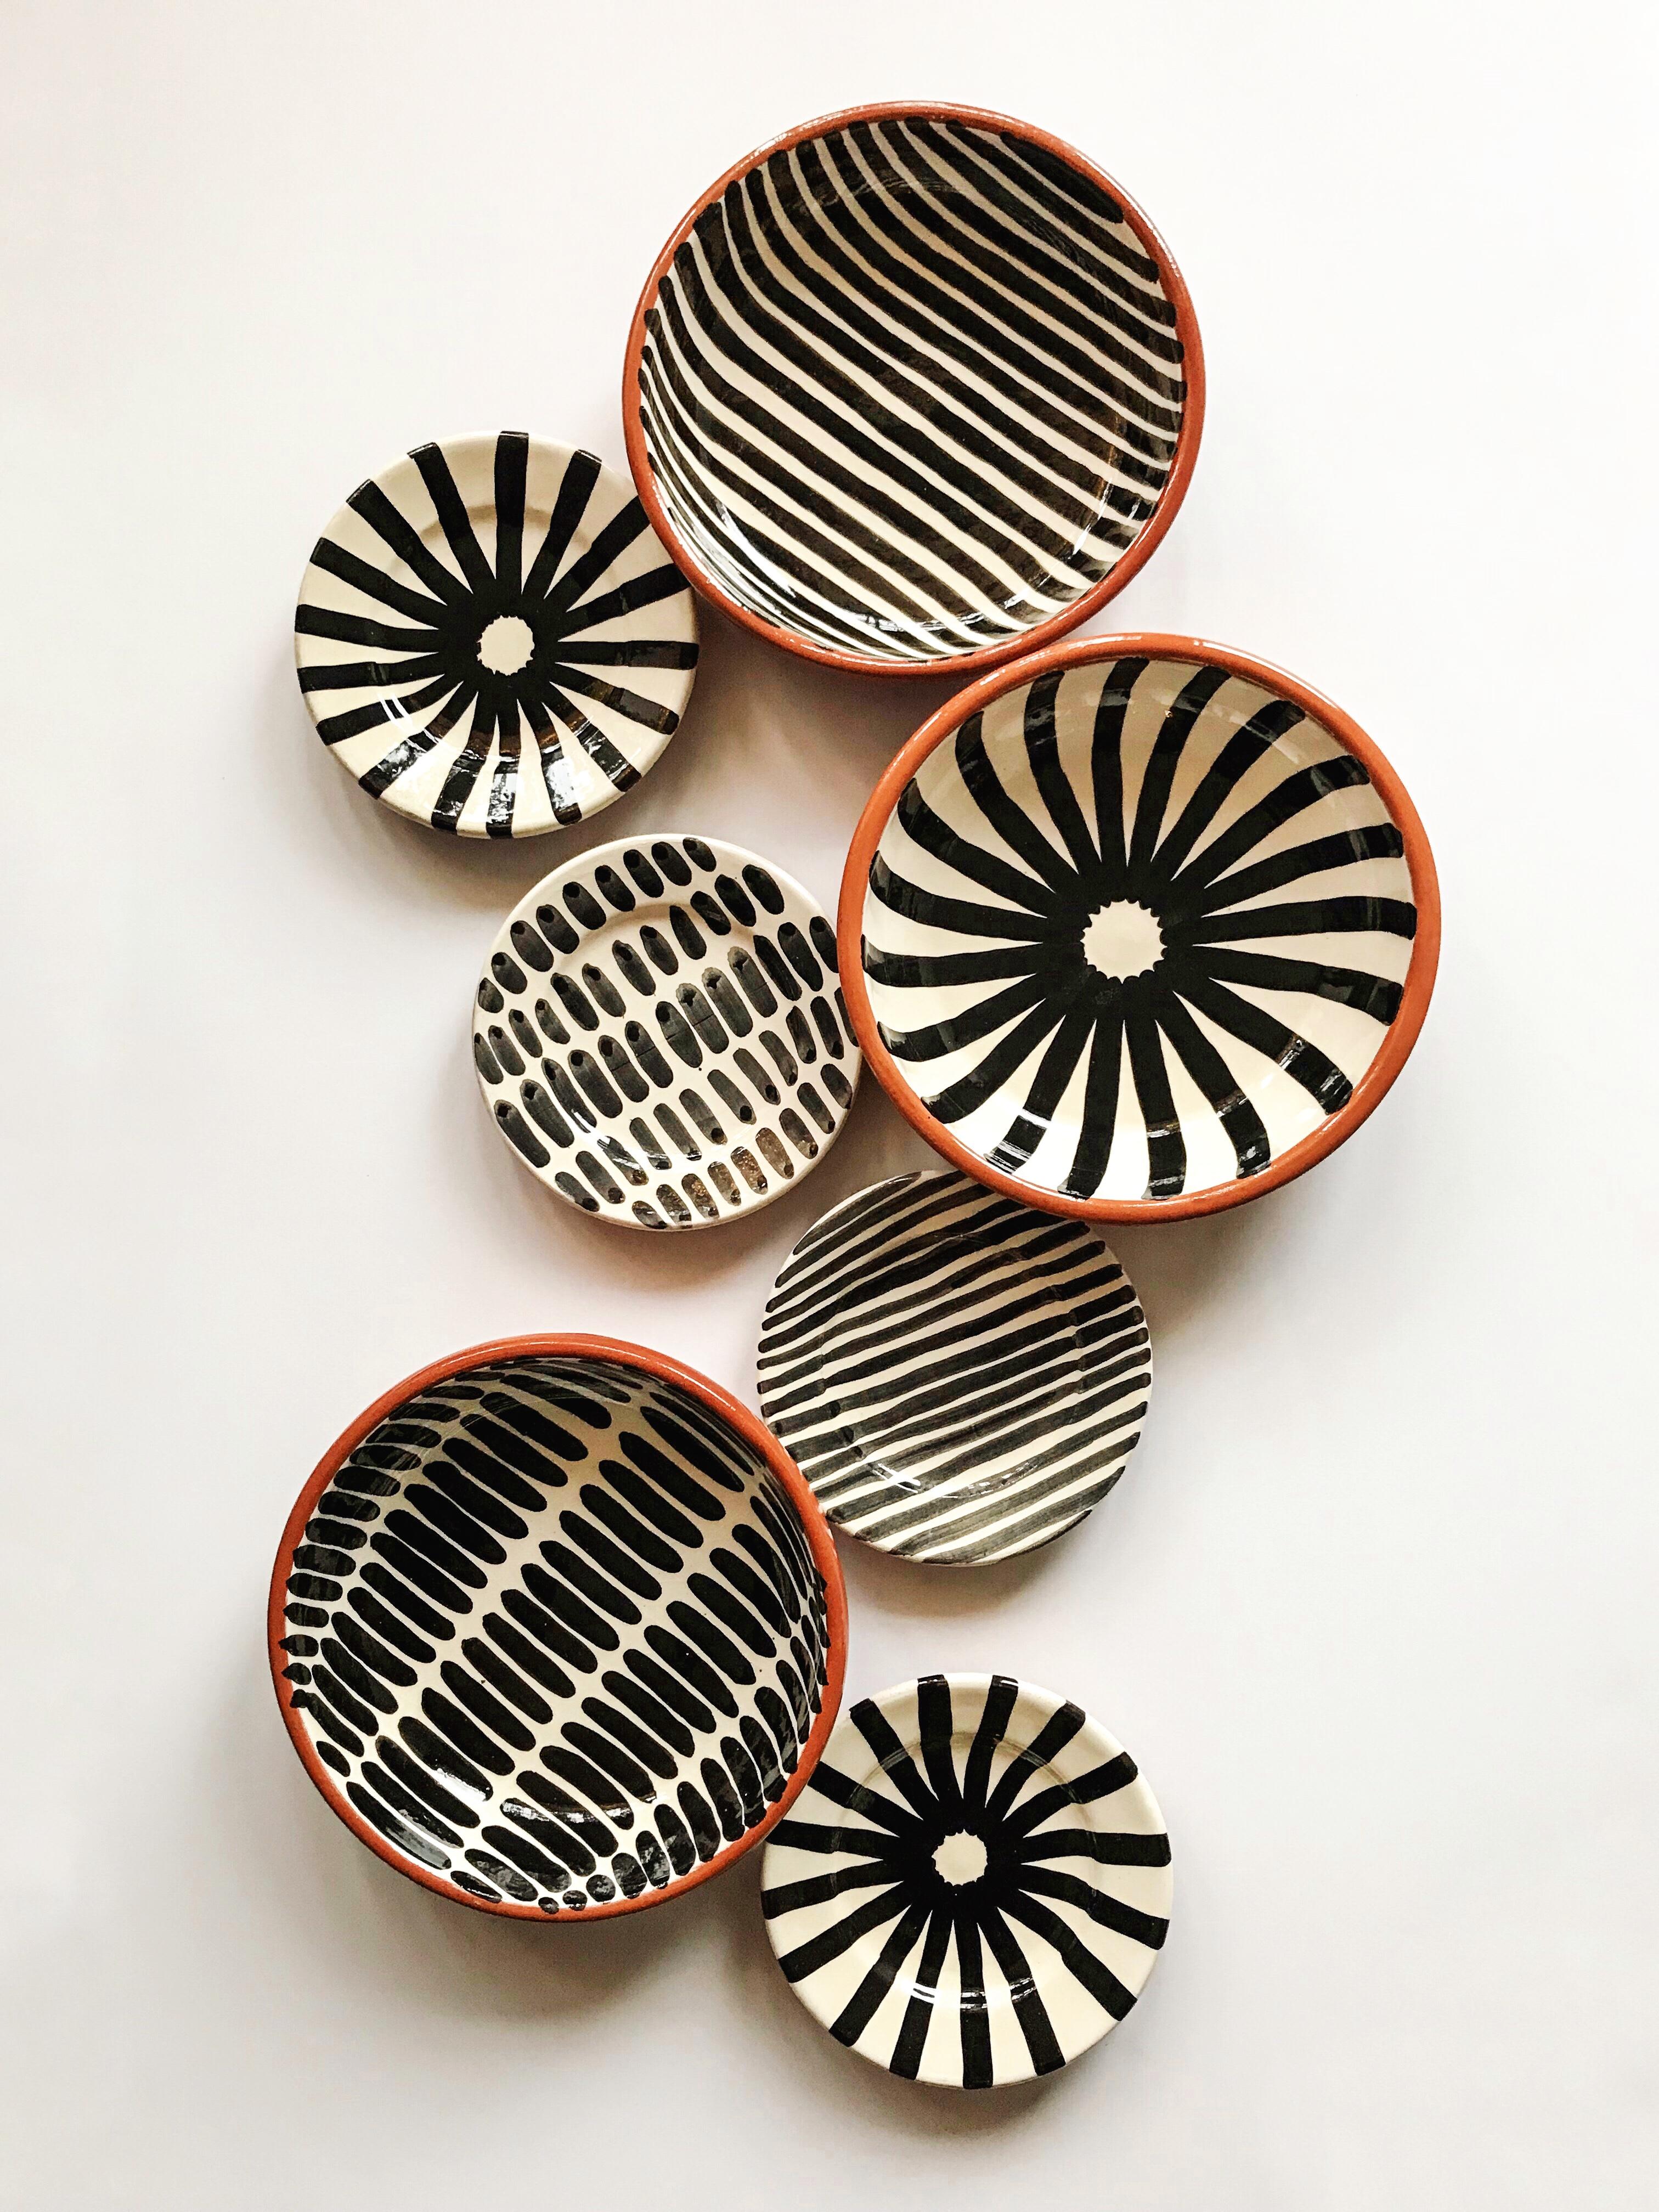 Handmade Ceramic Black and White Ray Pattern Mini Bowl, in Stock In New Condition For Sale In West Hollywood, CA